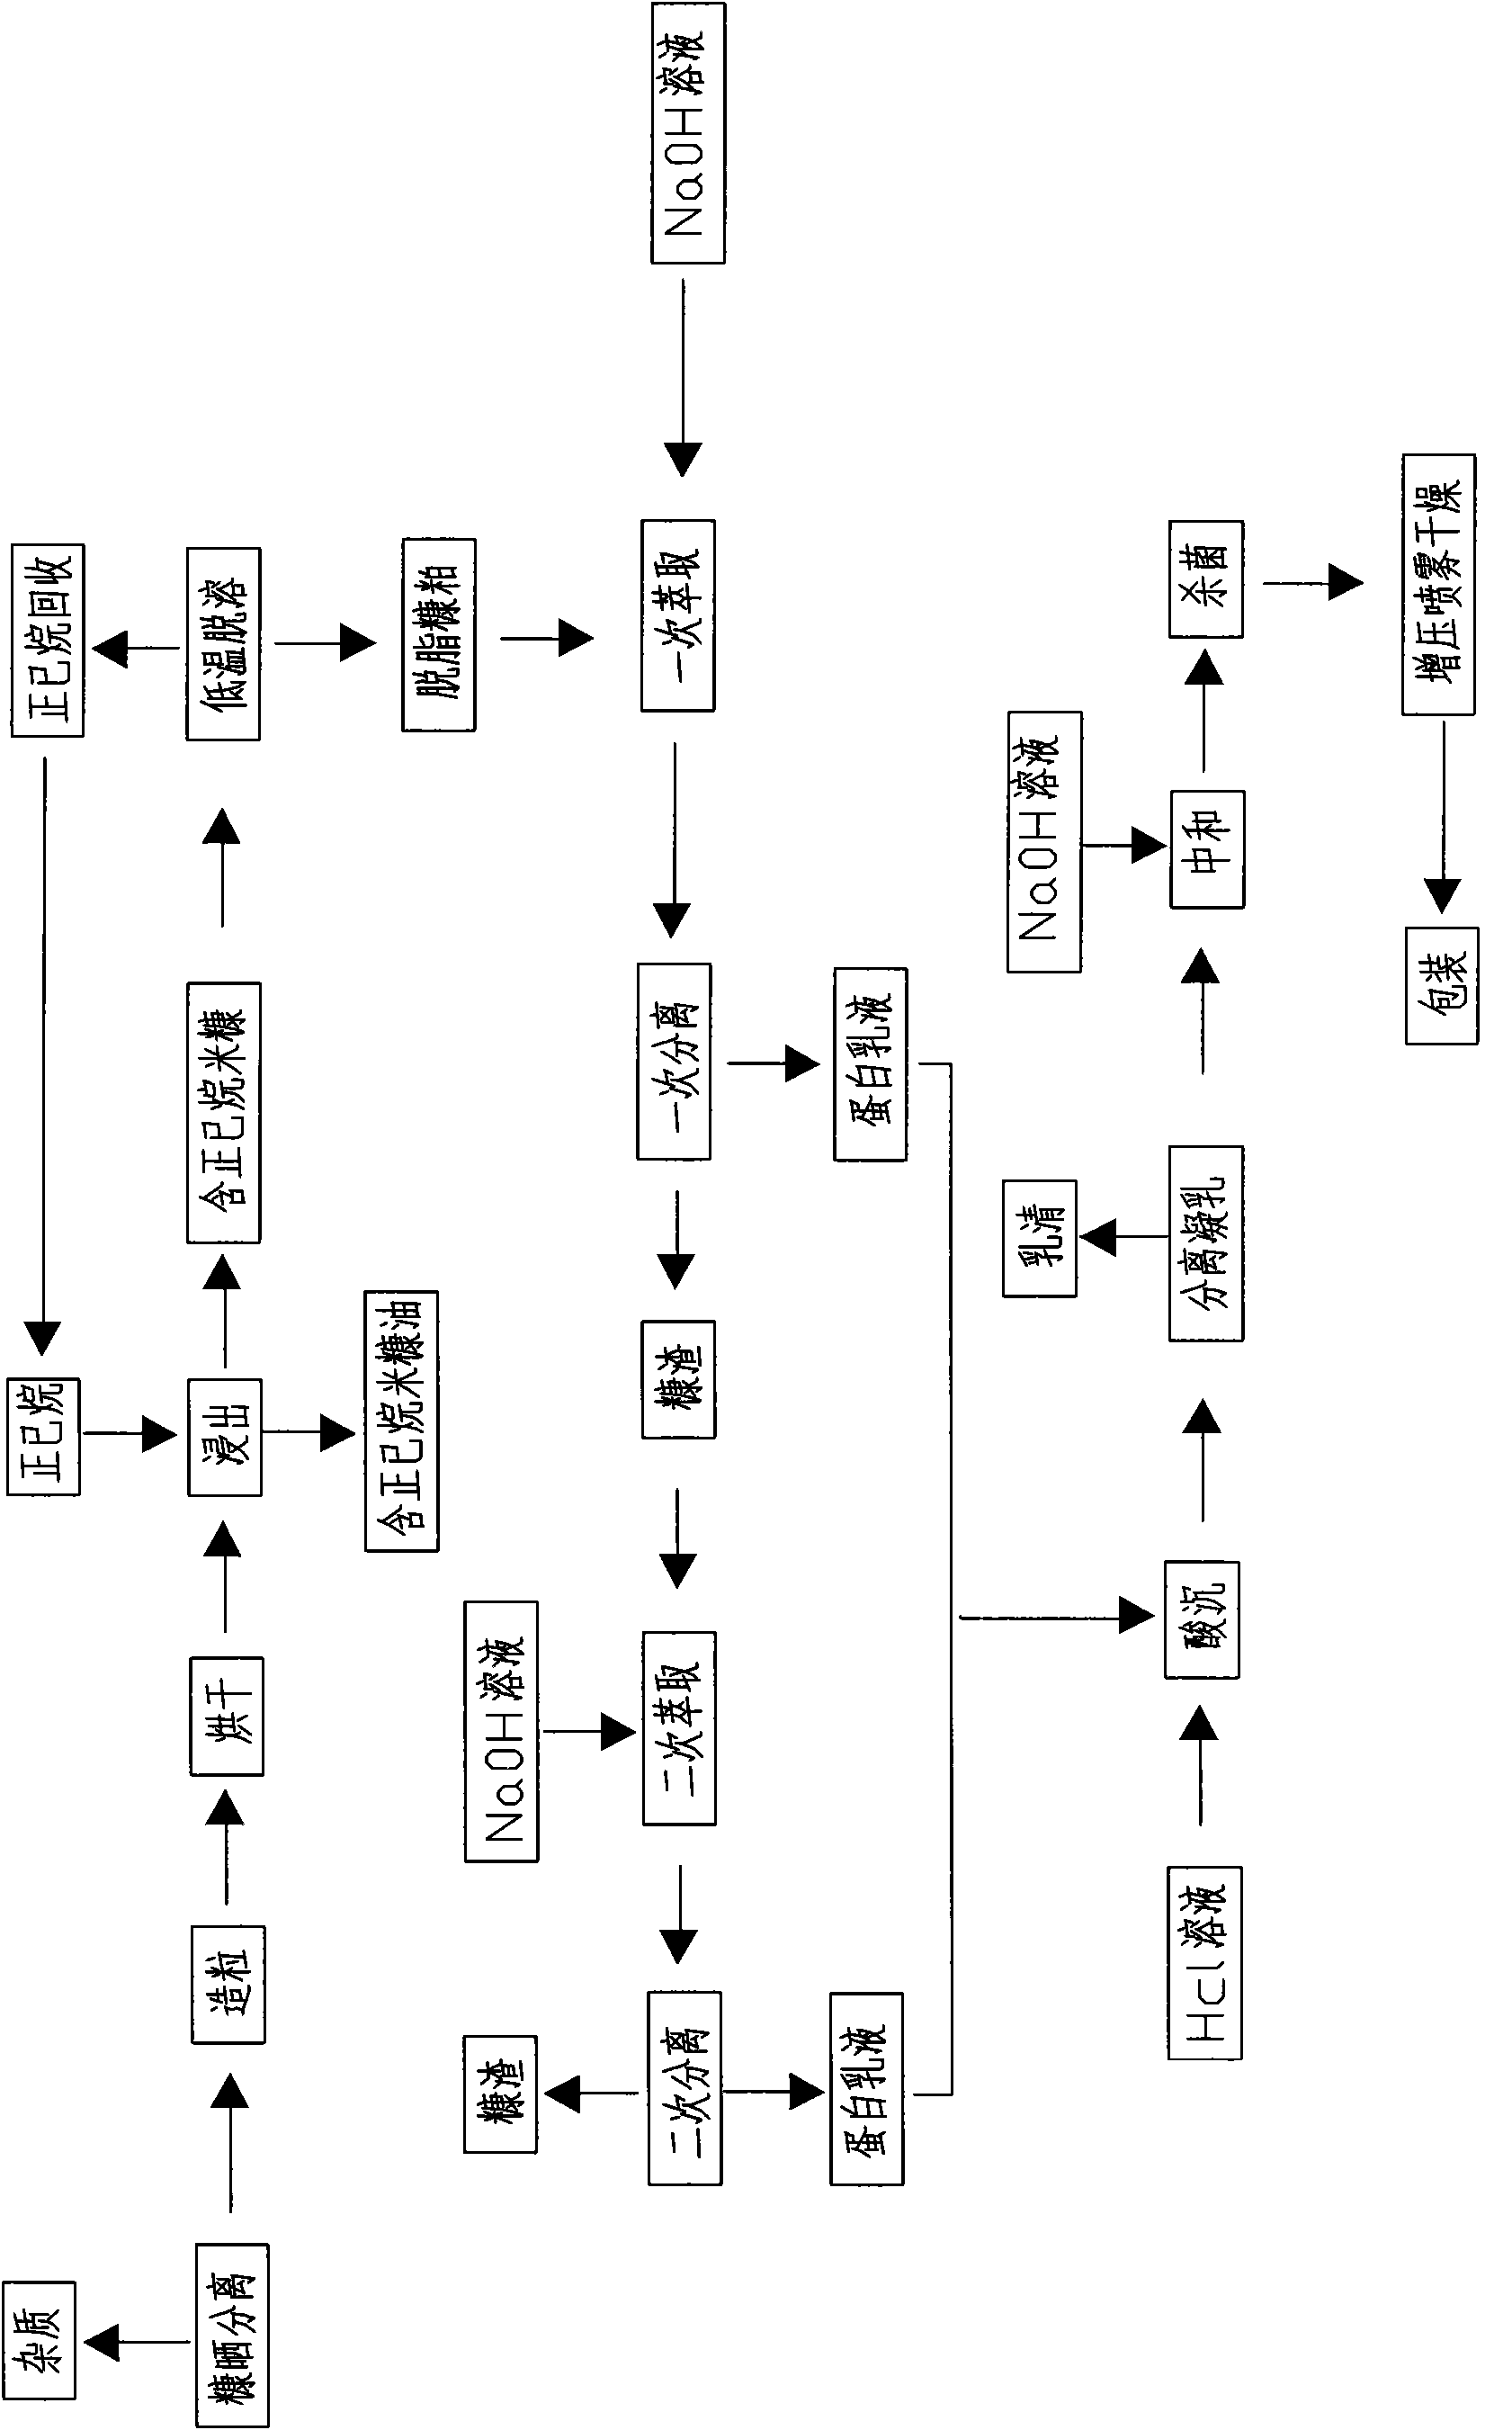 Production method for extracting and separating protein from rice bran